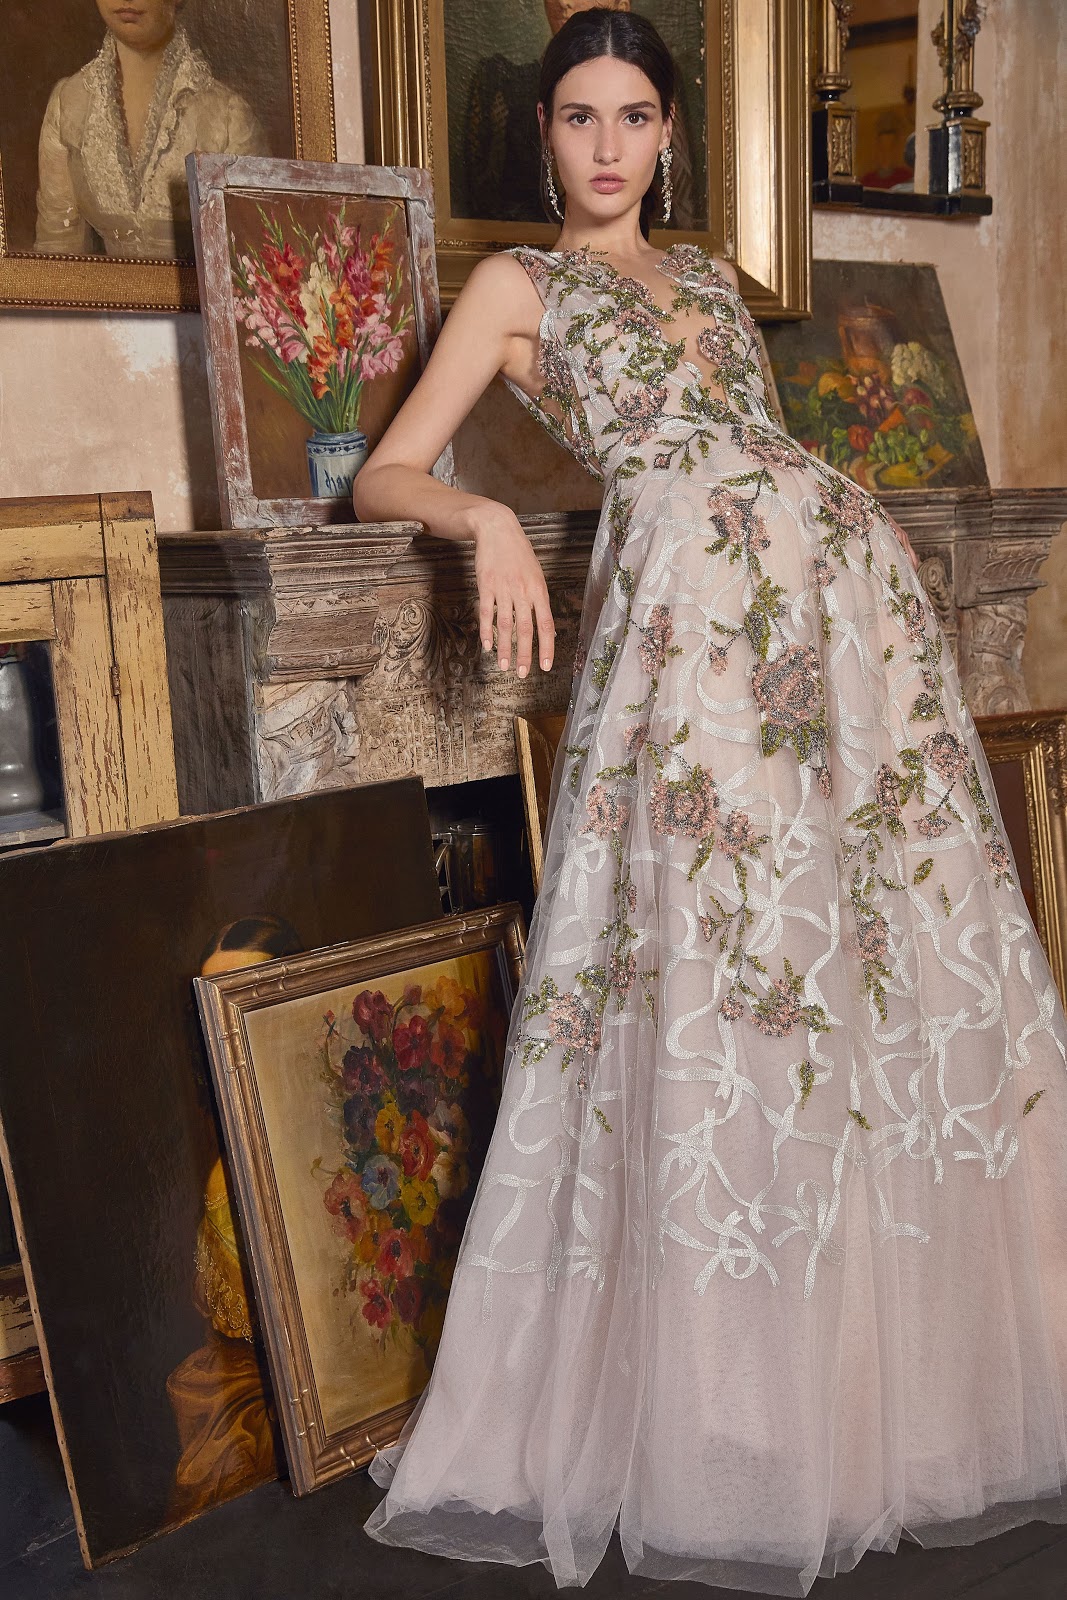 Marchesa Resort 2020 Collection | Cool Chic Style Fashion